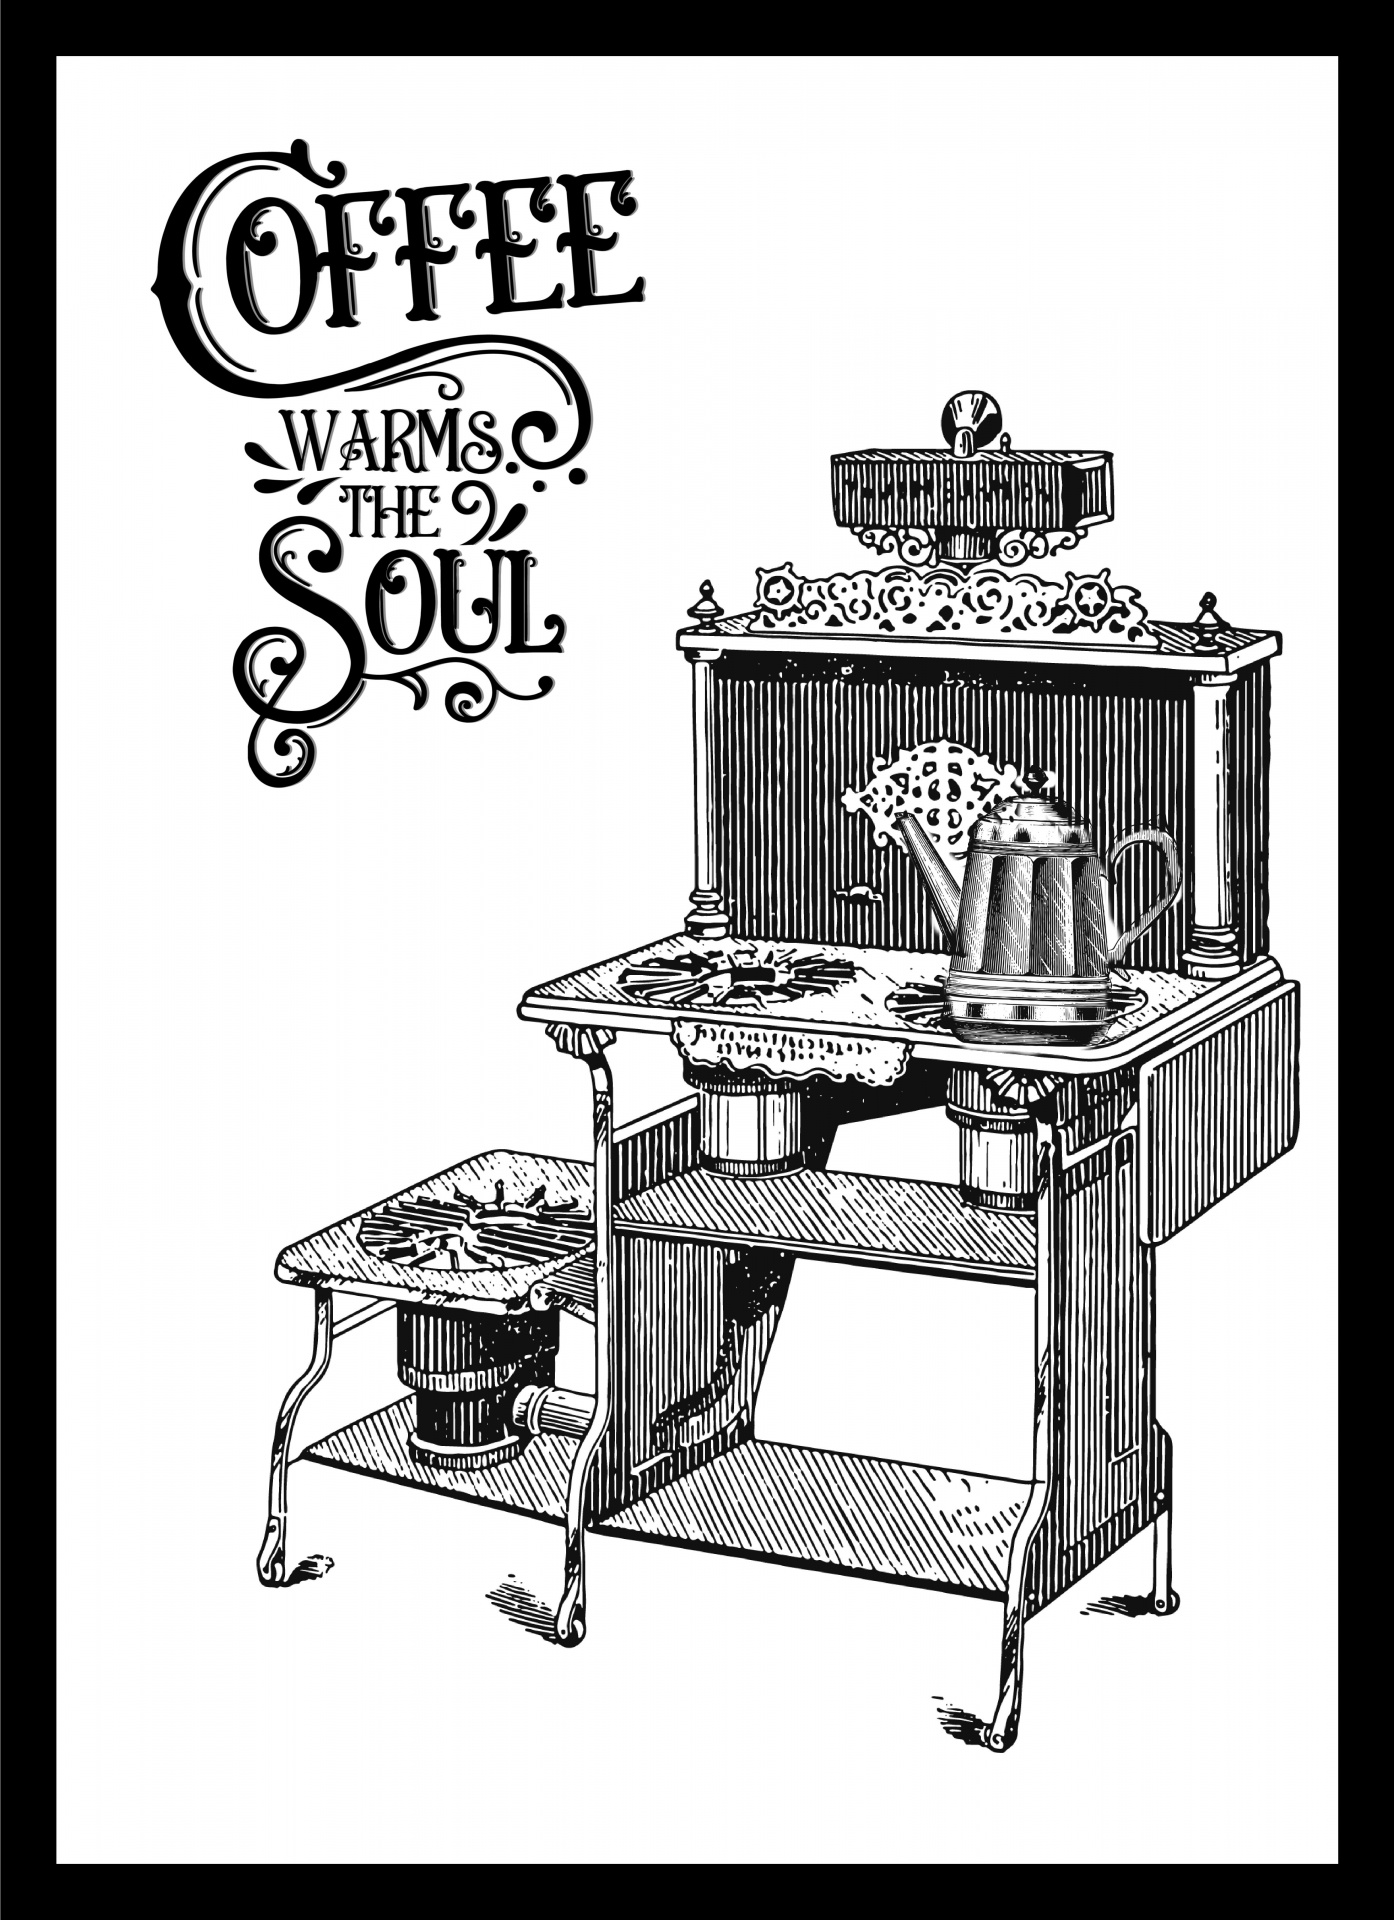 old fashion stove with a coffee pot and word art about coffee on white background